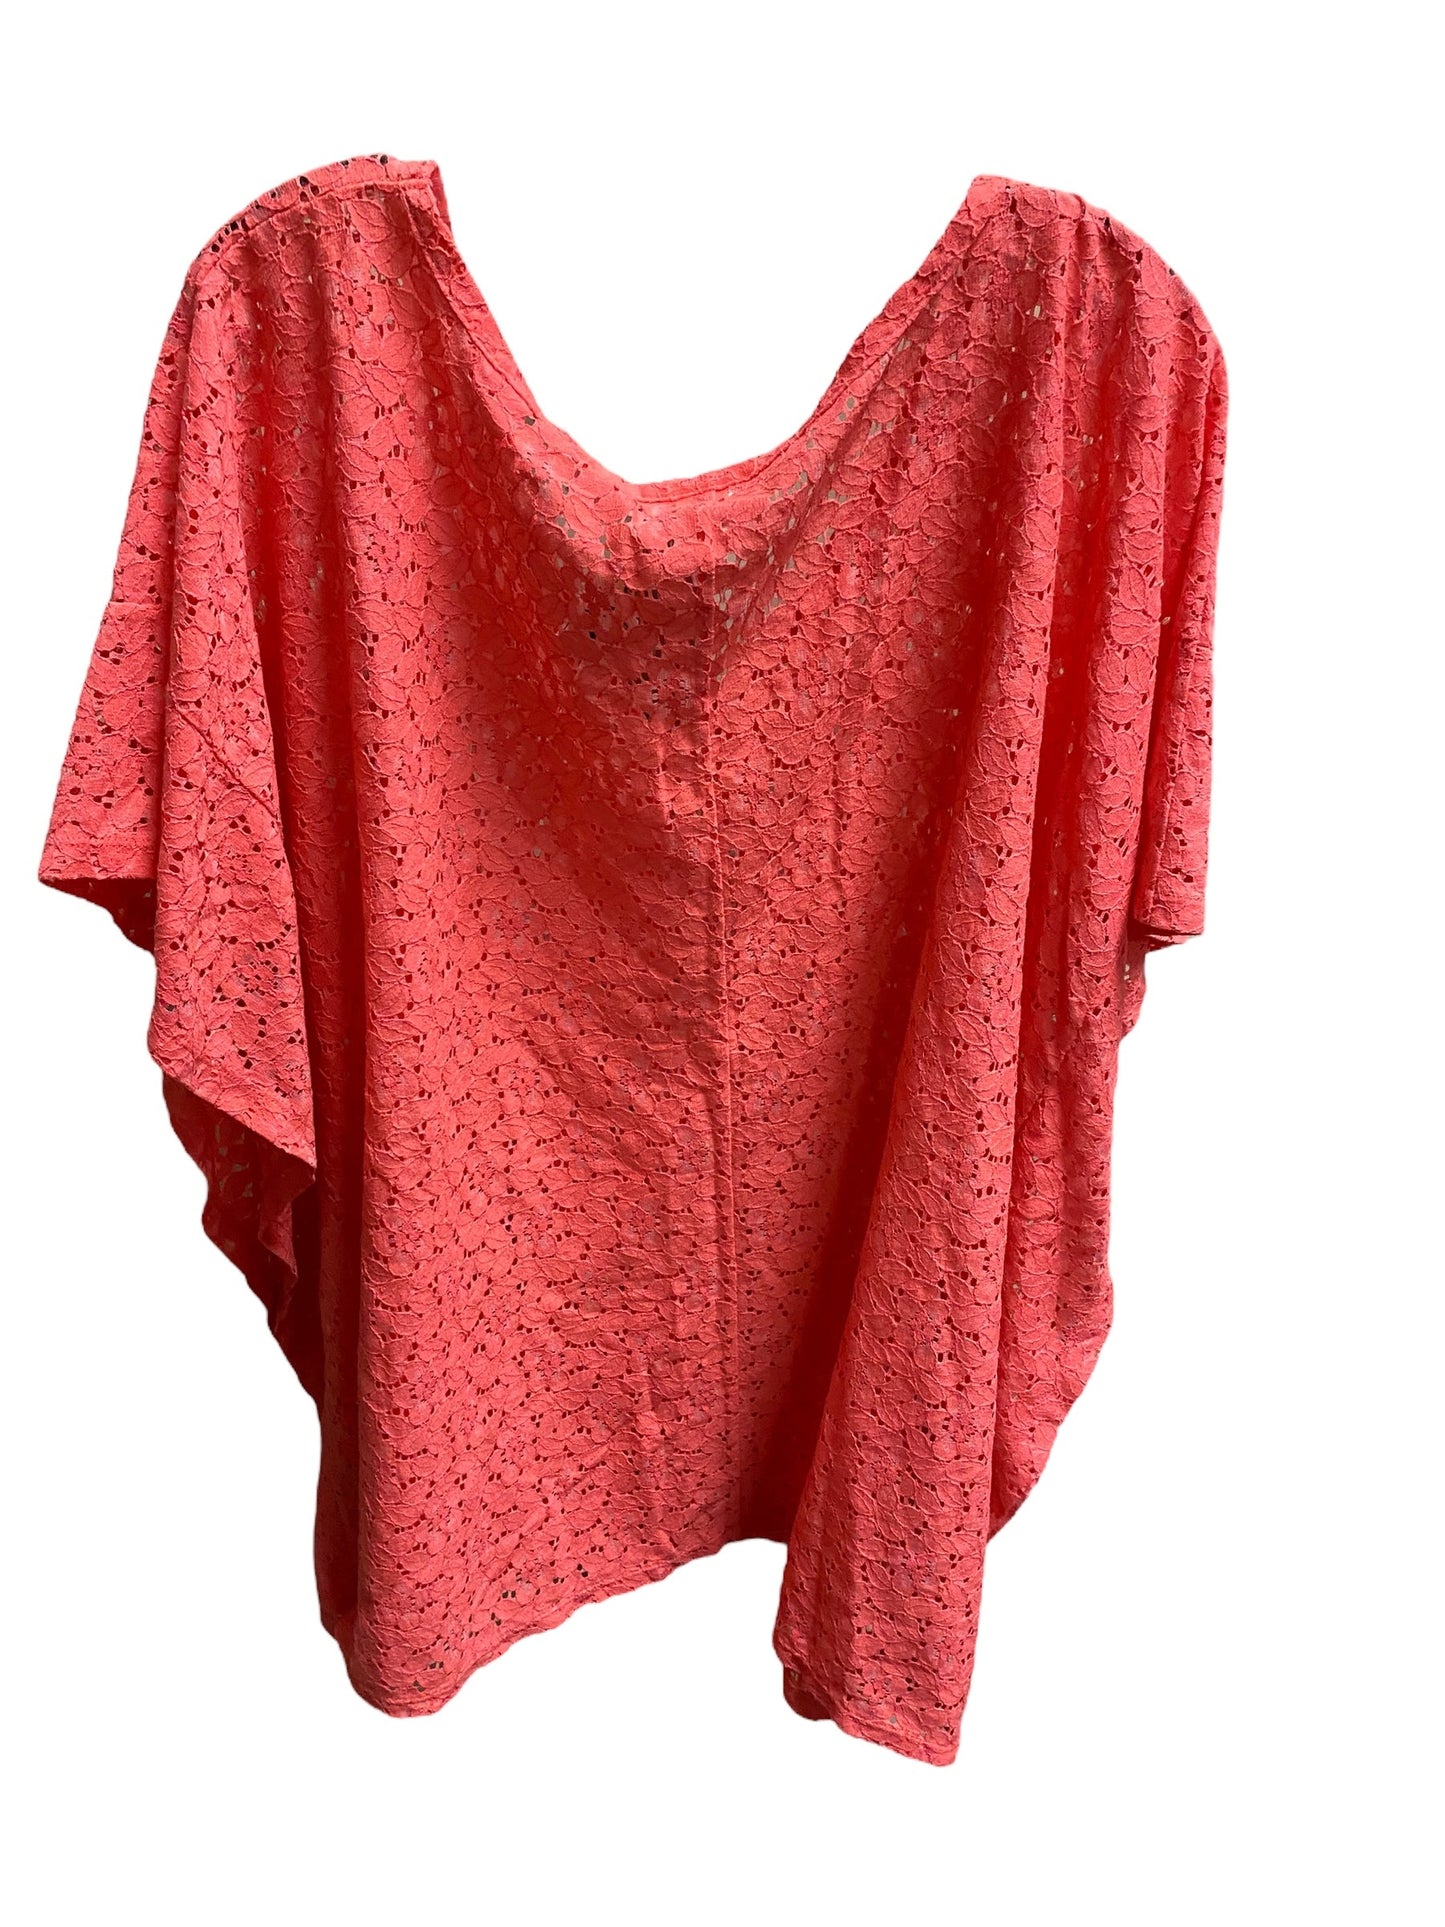 Coral Top Short Sleeve Avenue, Size 3x